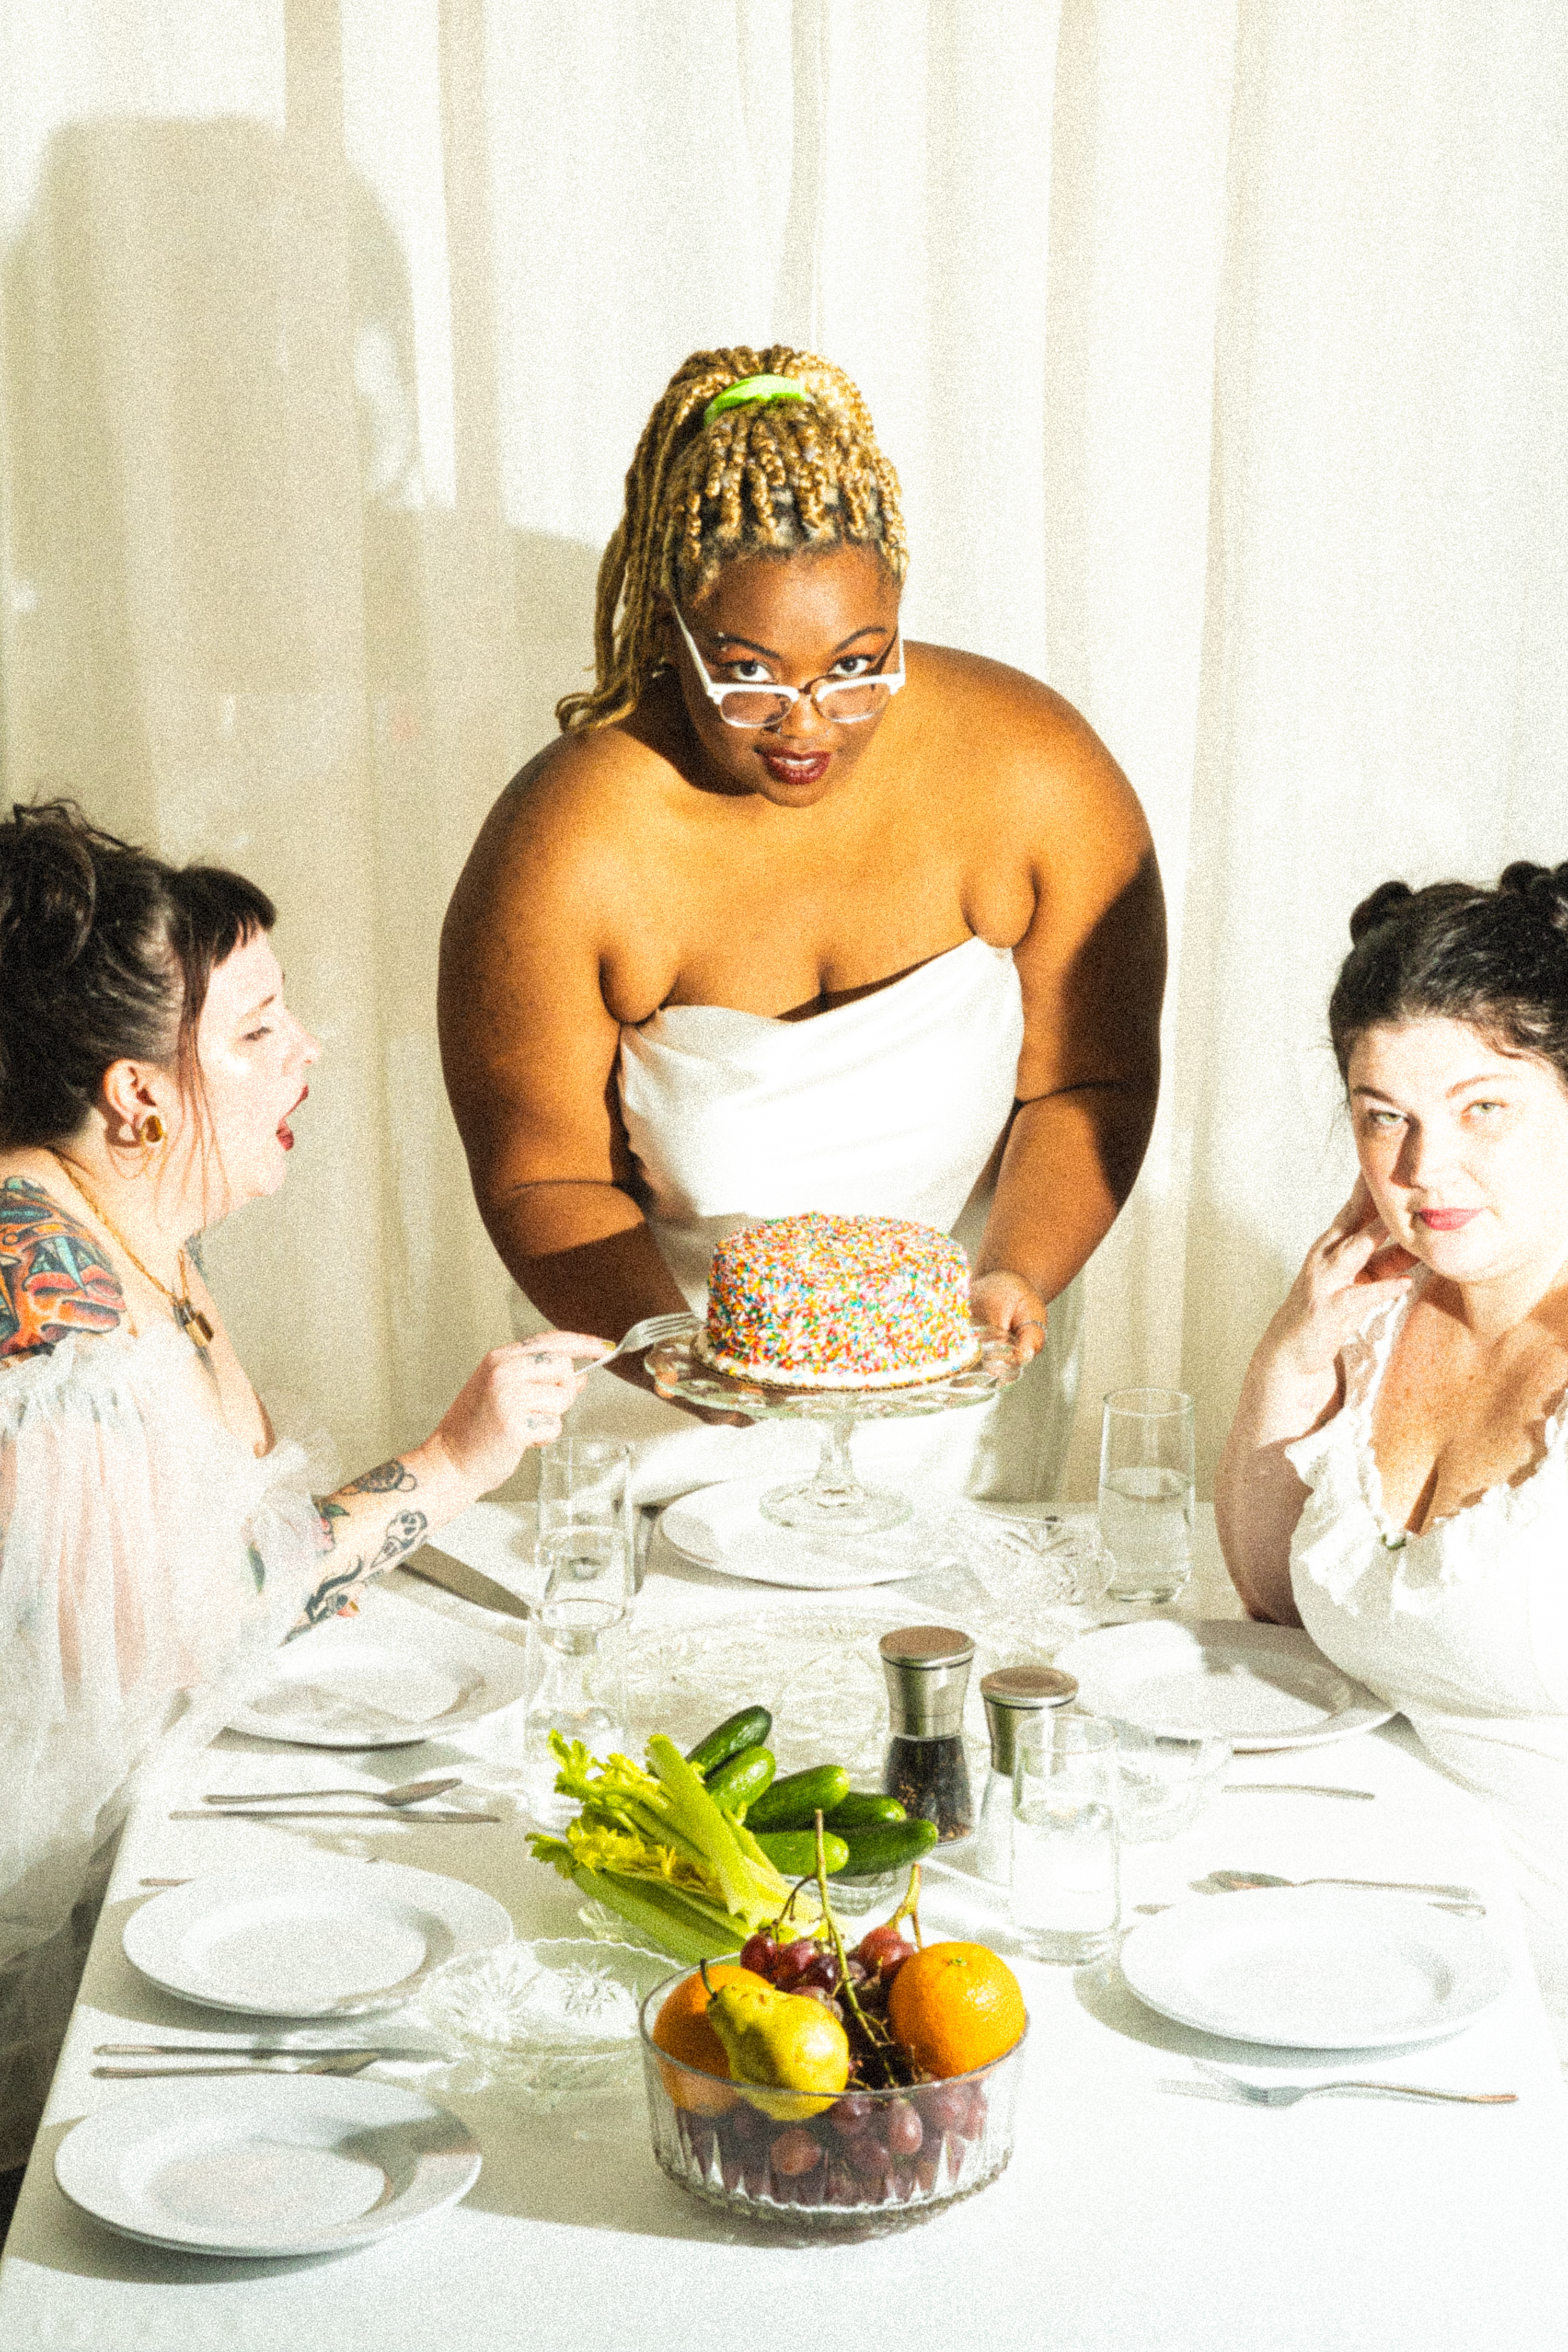 A seat at the table: ‘I Will Eat You Alive’ confronts fatphobia